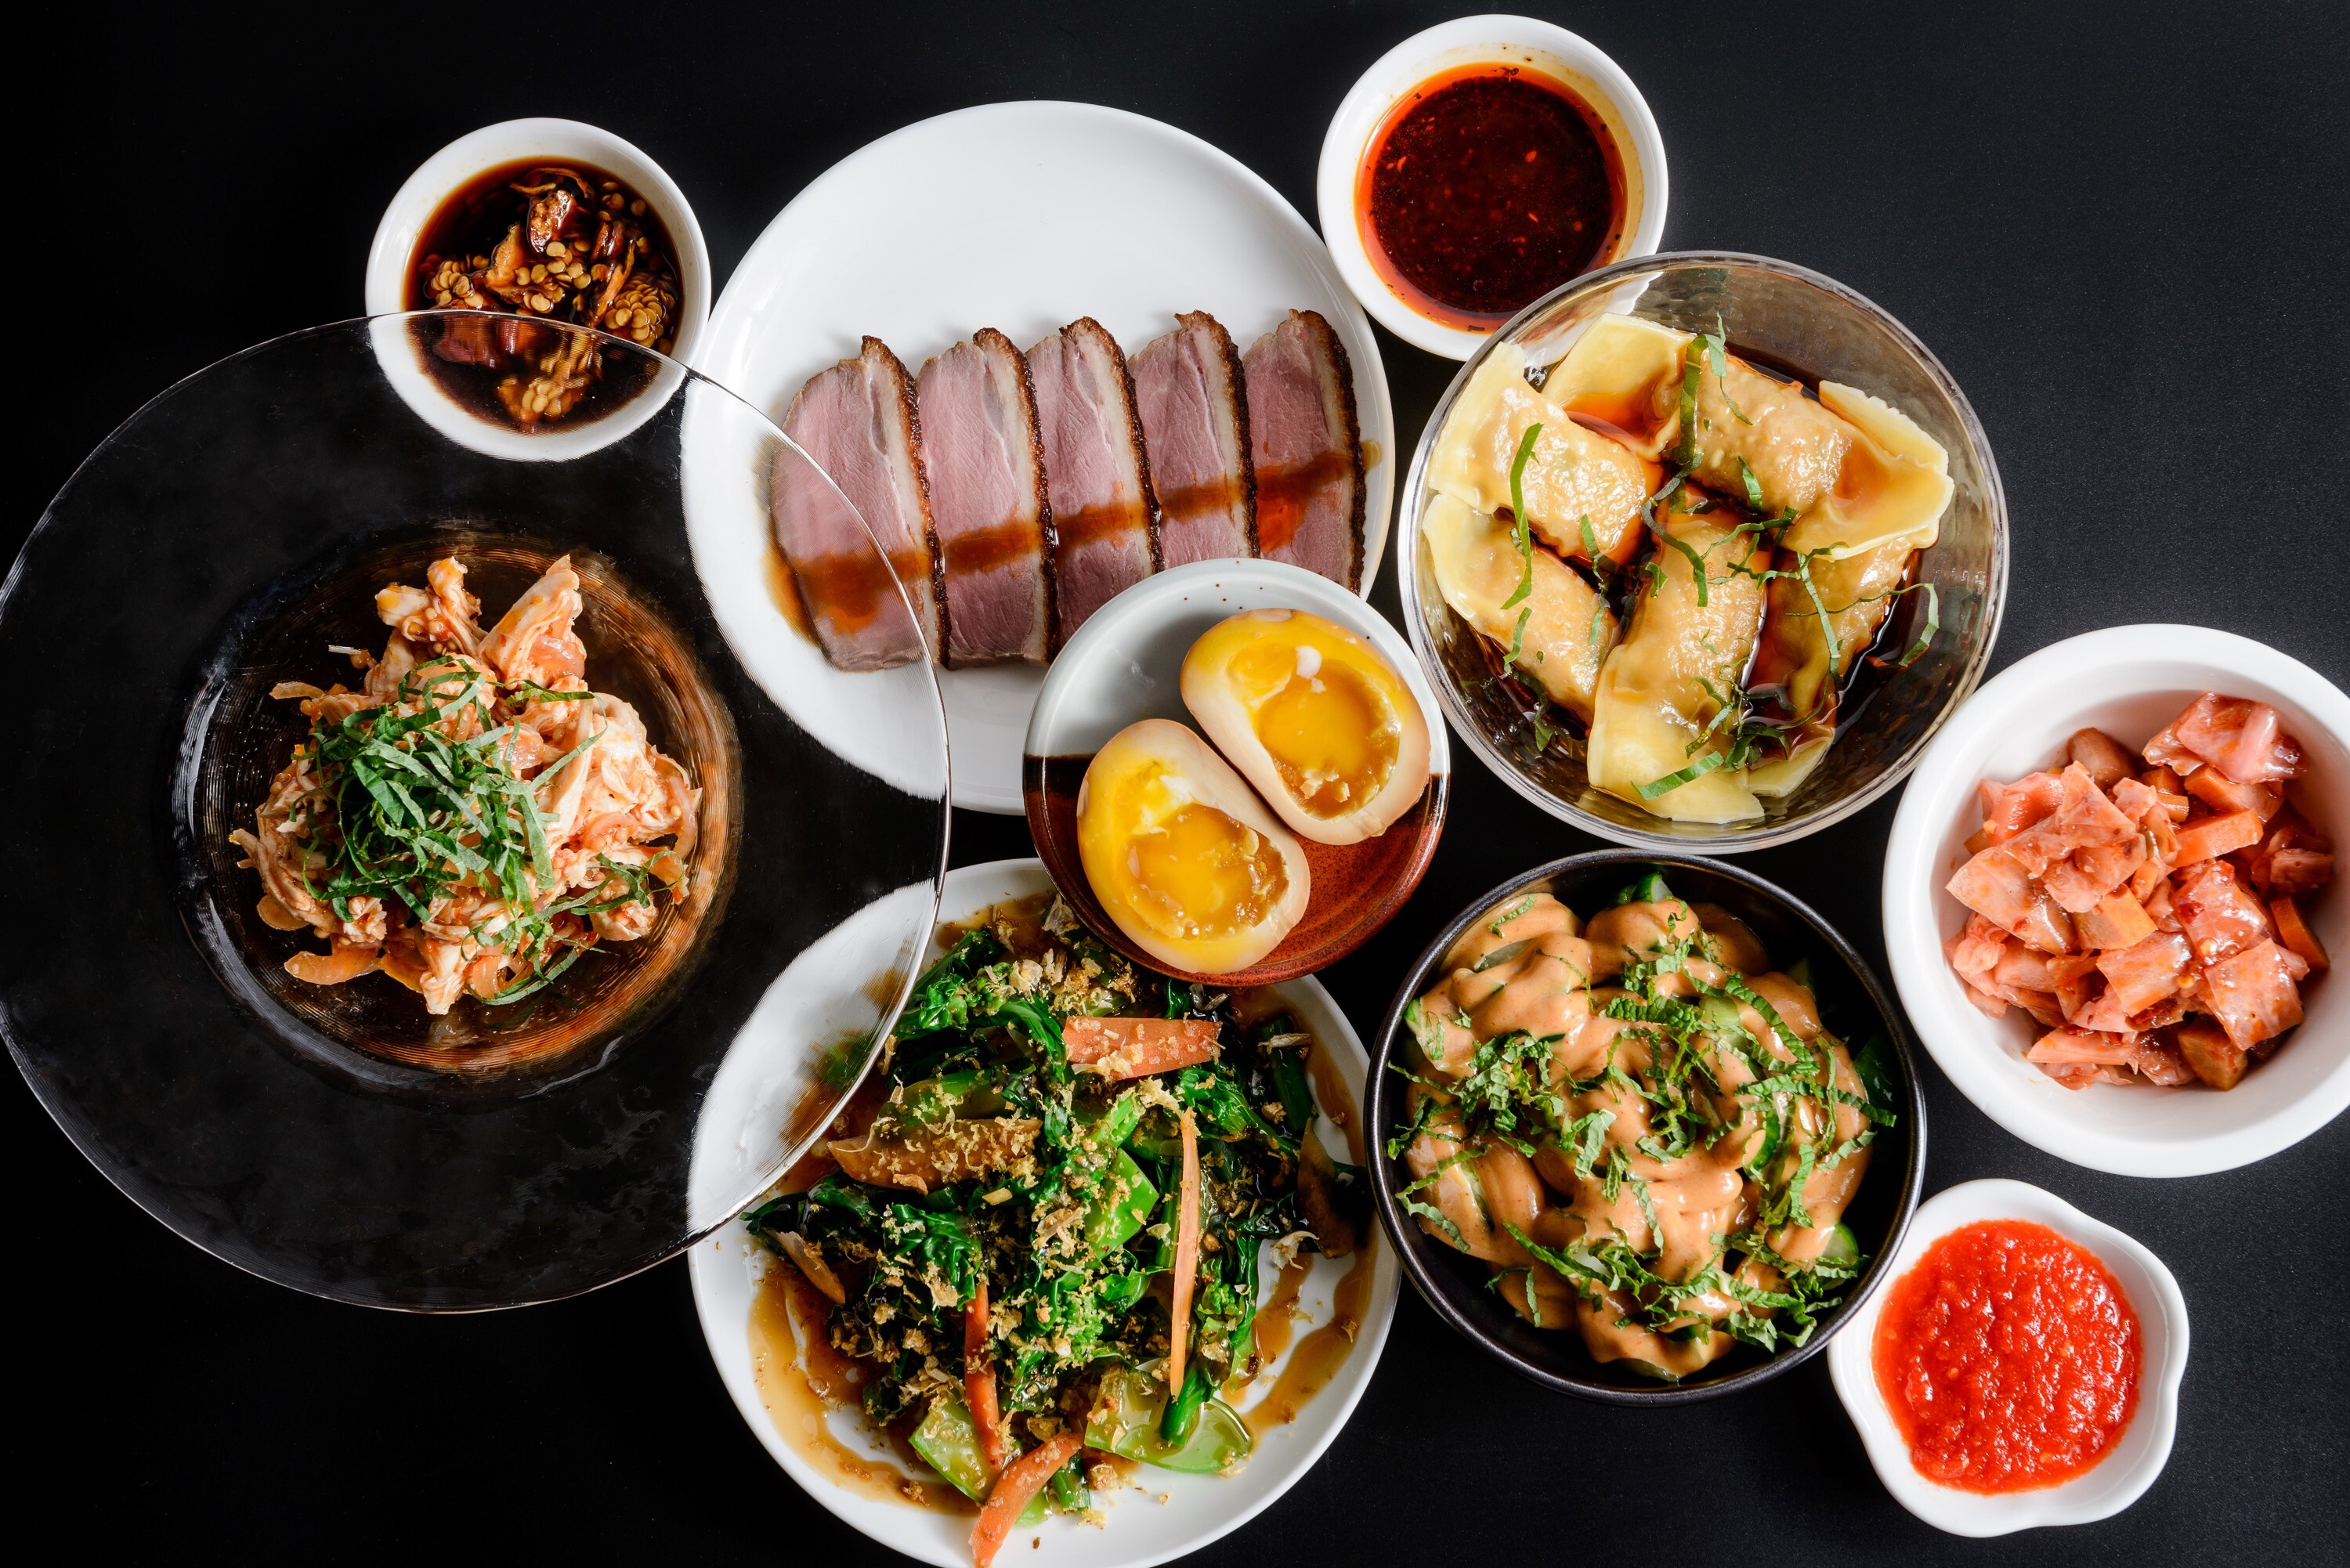 Appetizers and small plates by New York-based chef Simone Tong. Photo: Kuo Heng-Huang